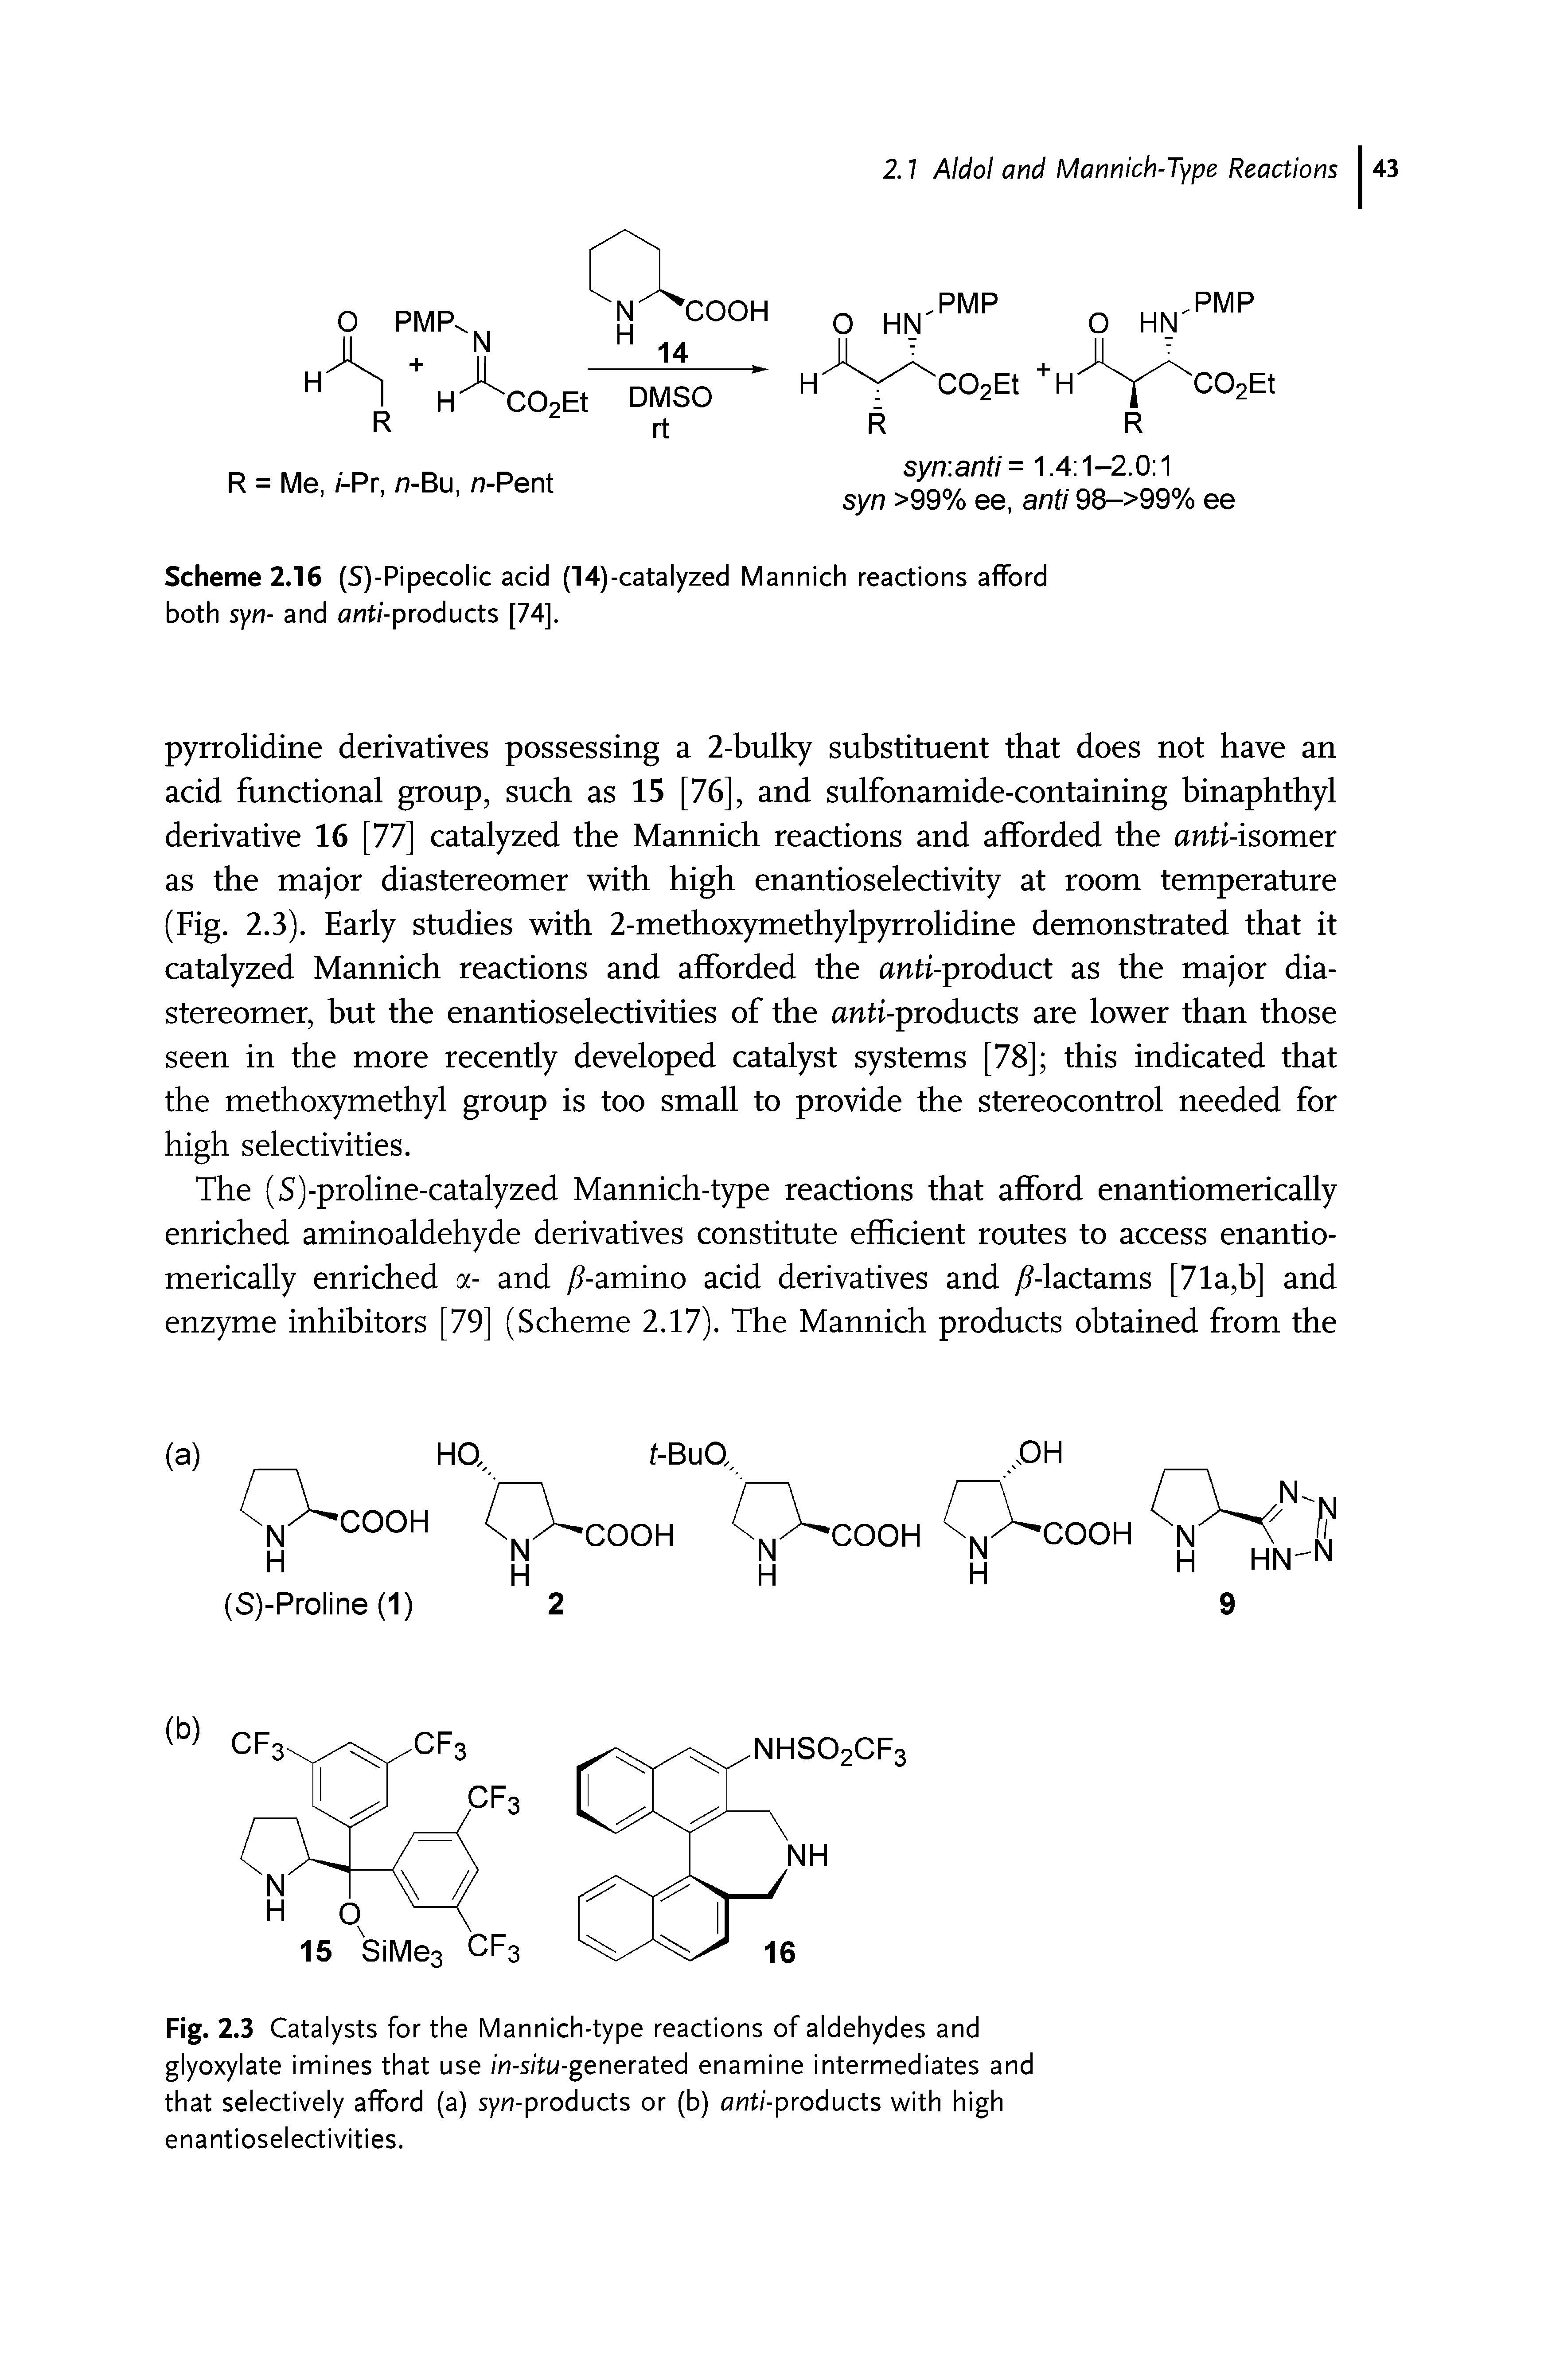 Scheme 2.16 (S)-Pipecolic acid (14)-catalyzed Mannich reactions afford both syn- and anti-products [74].